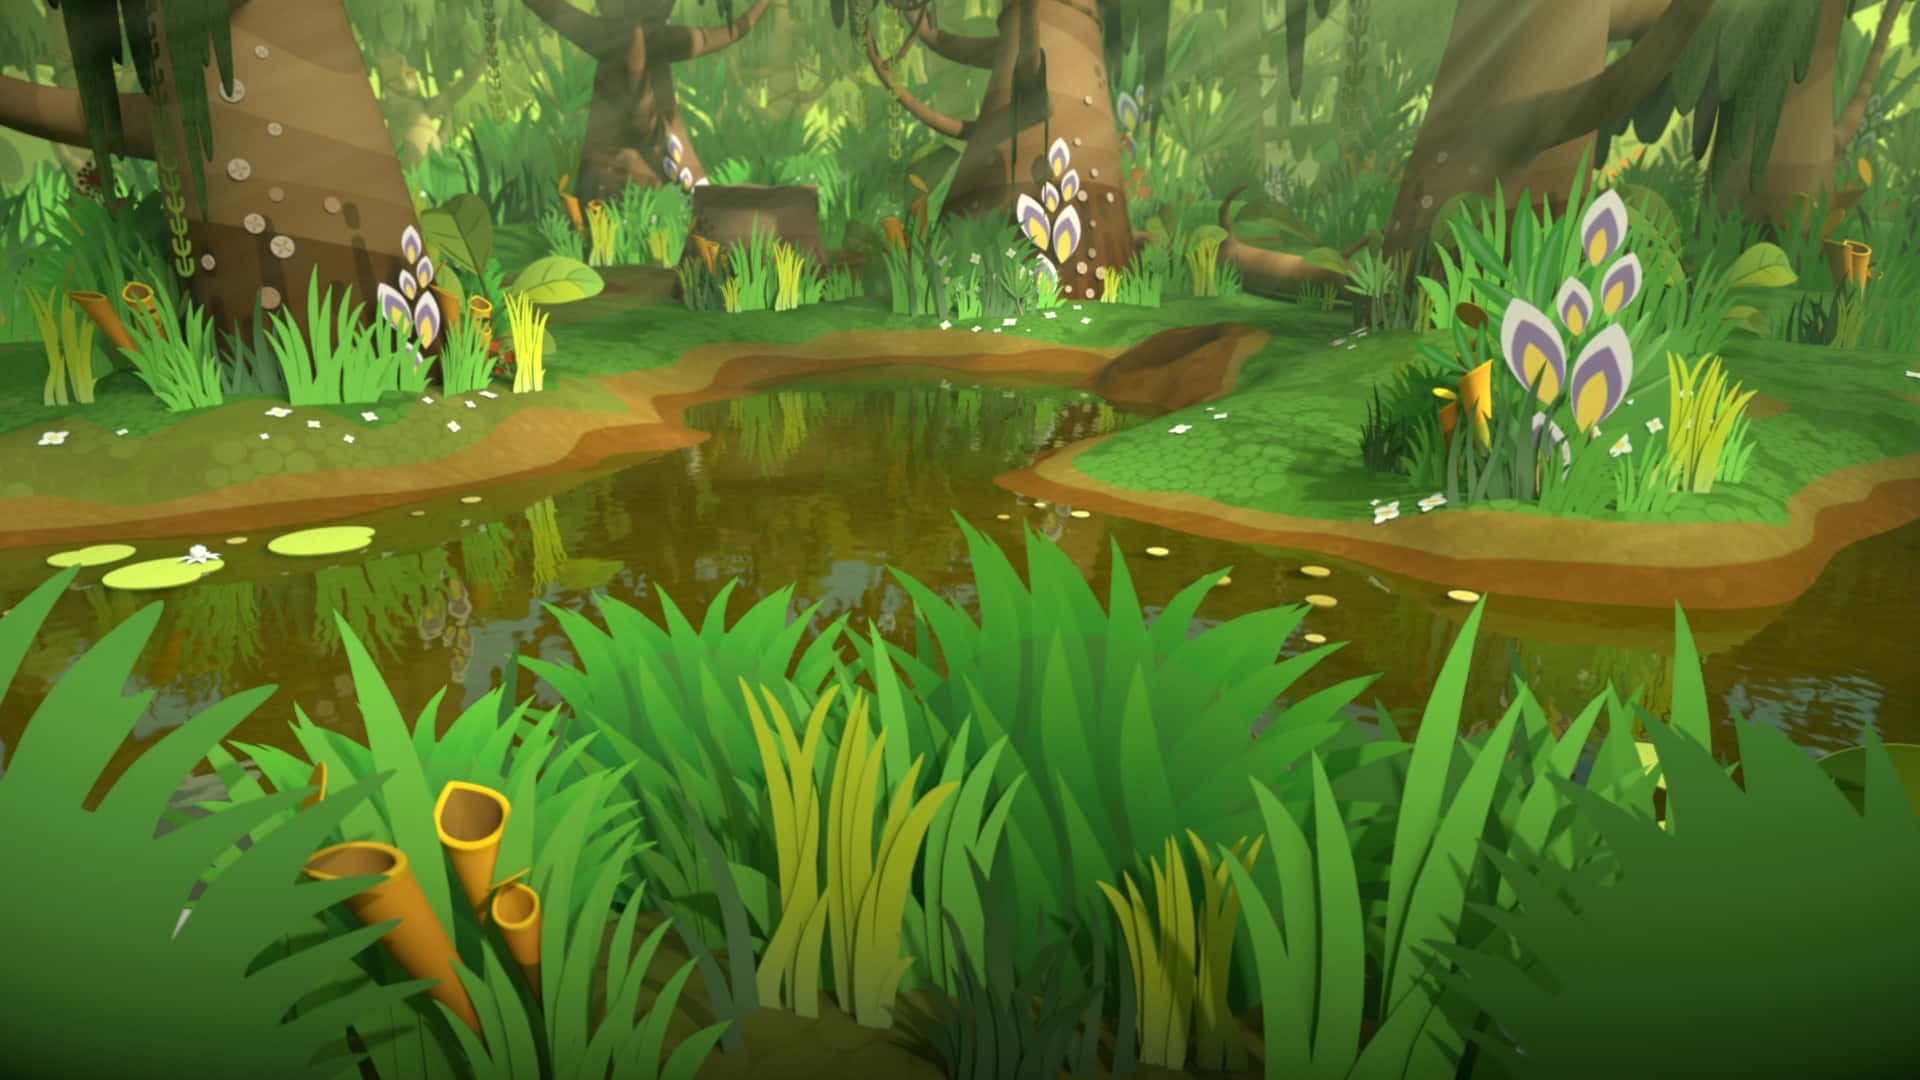 A Cartoon Forest With A Pond And Grass Wallpaper